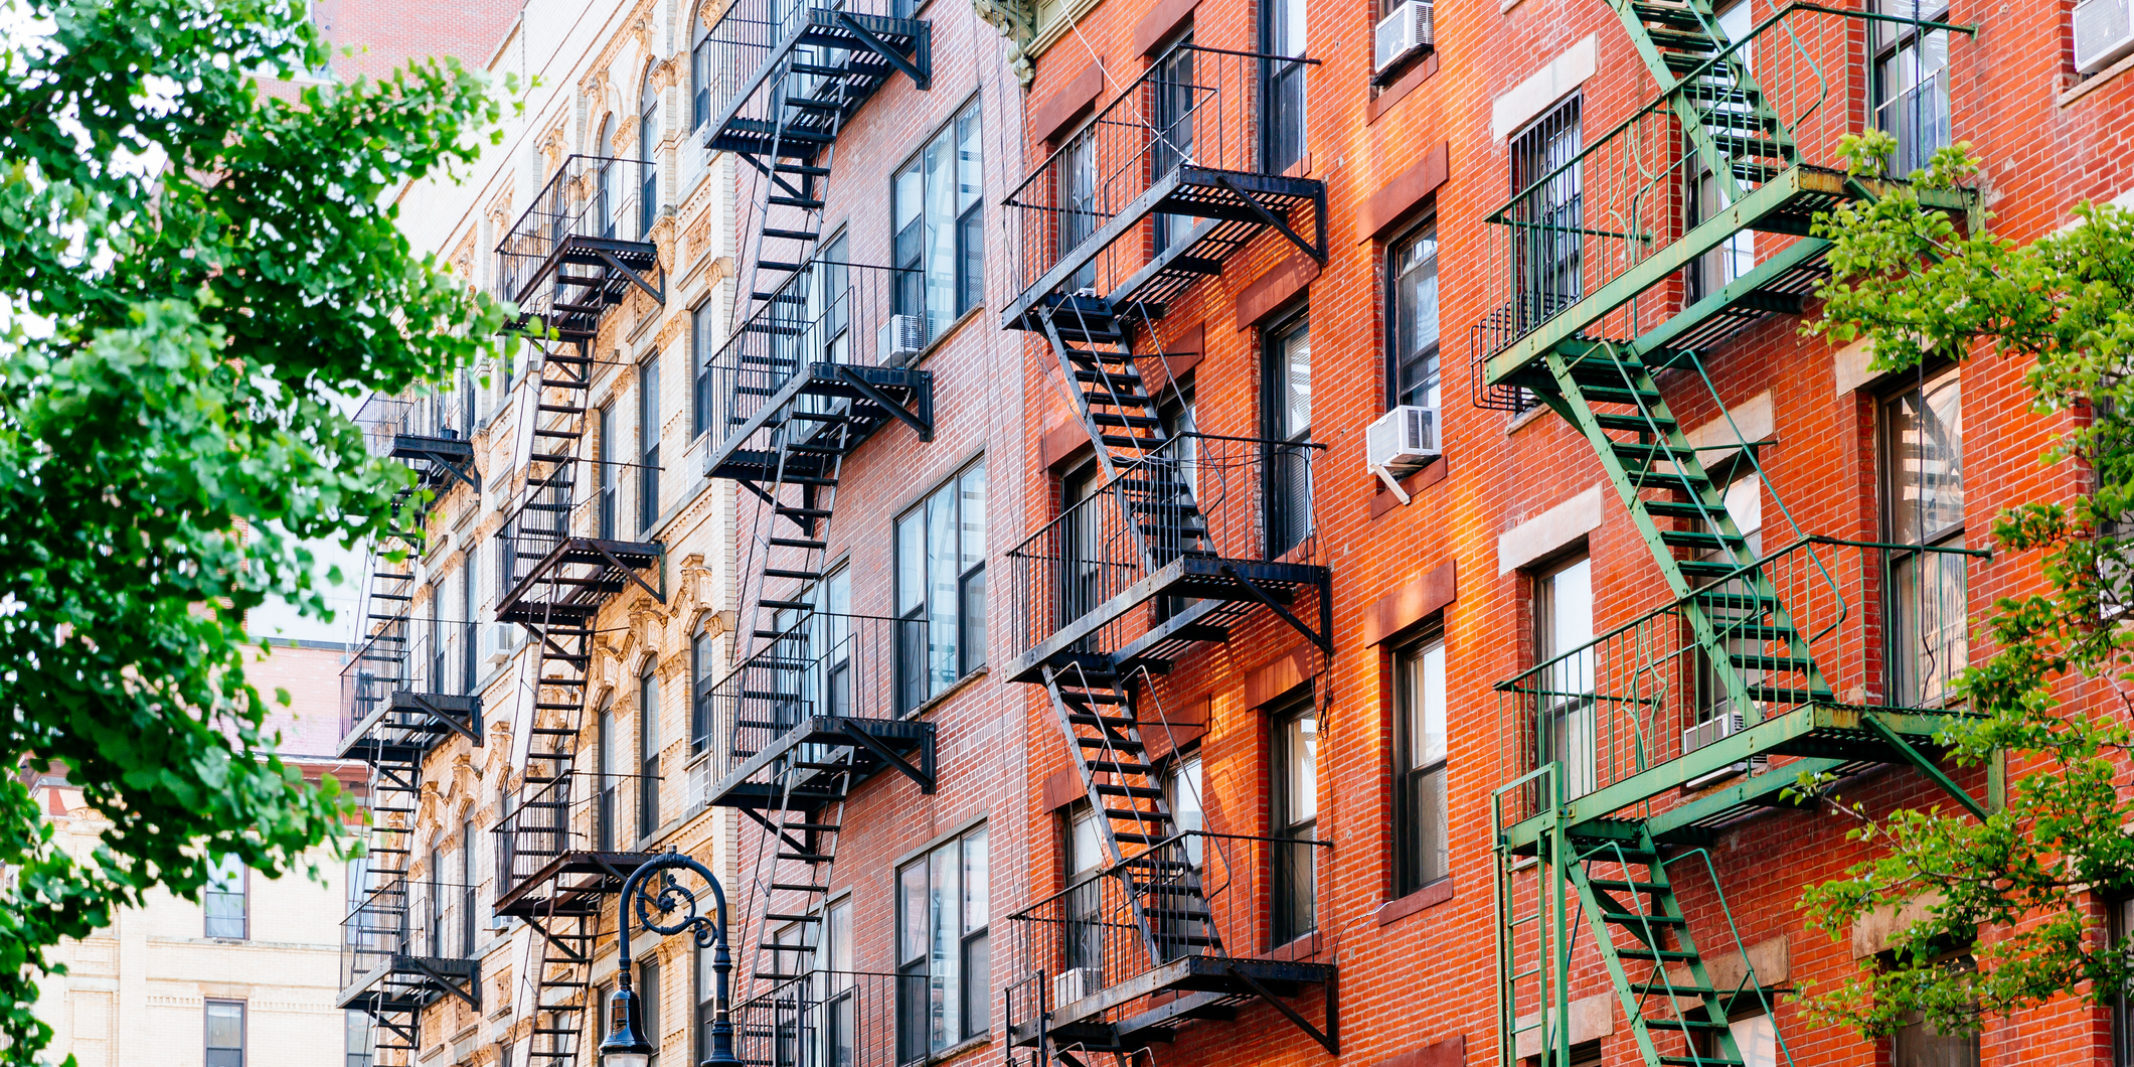 Outside of a New York City apartment building with numerous fire escapes.